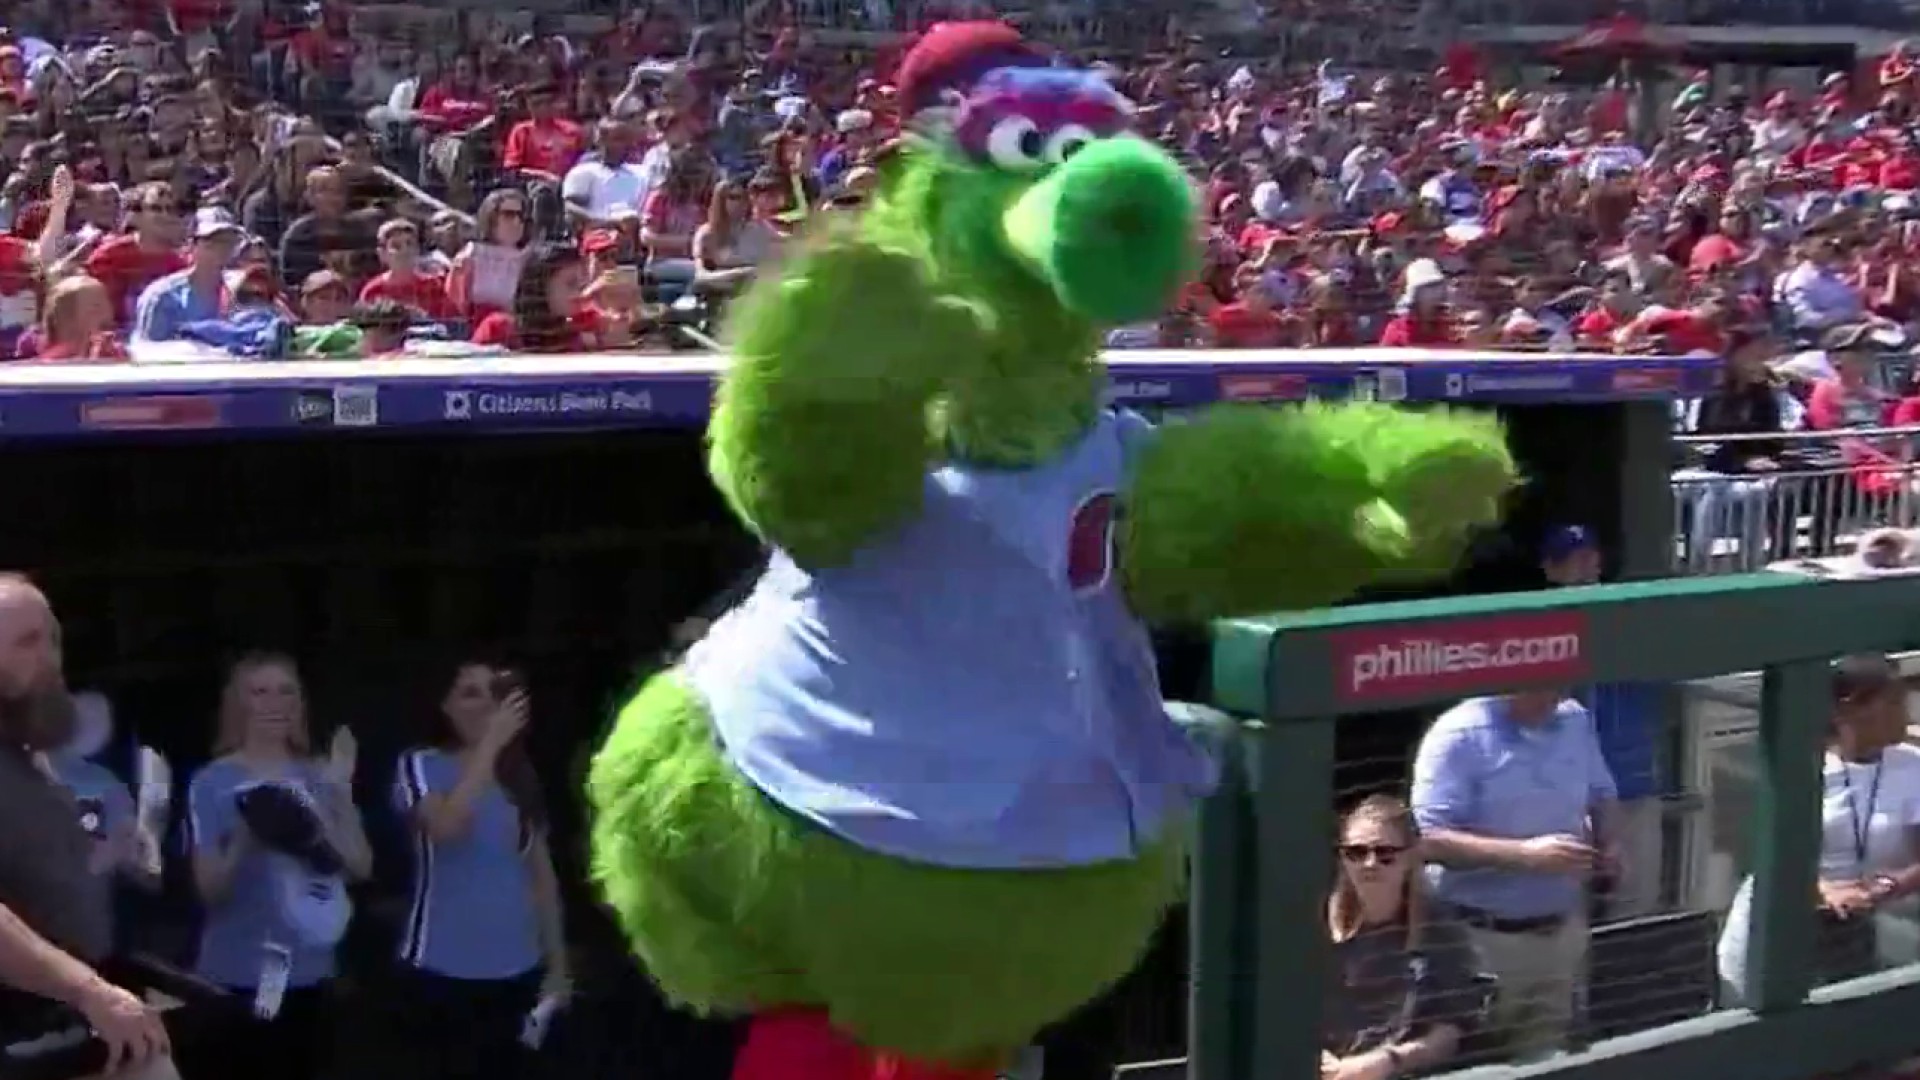 How can the Phanatic be listed as 9th best MLB mascot? – NBC10 Philadelphia